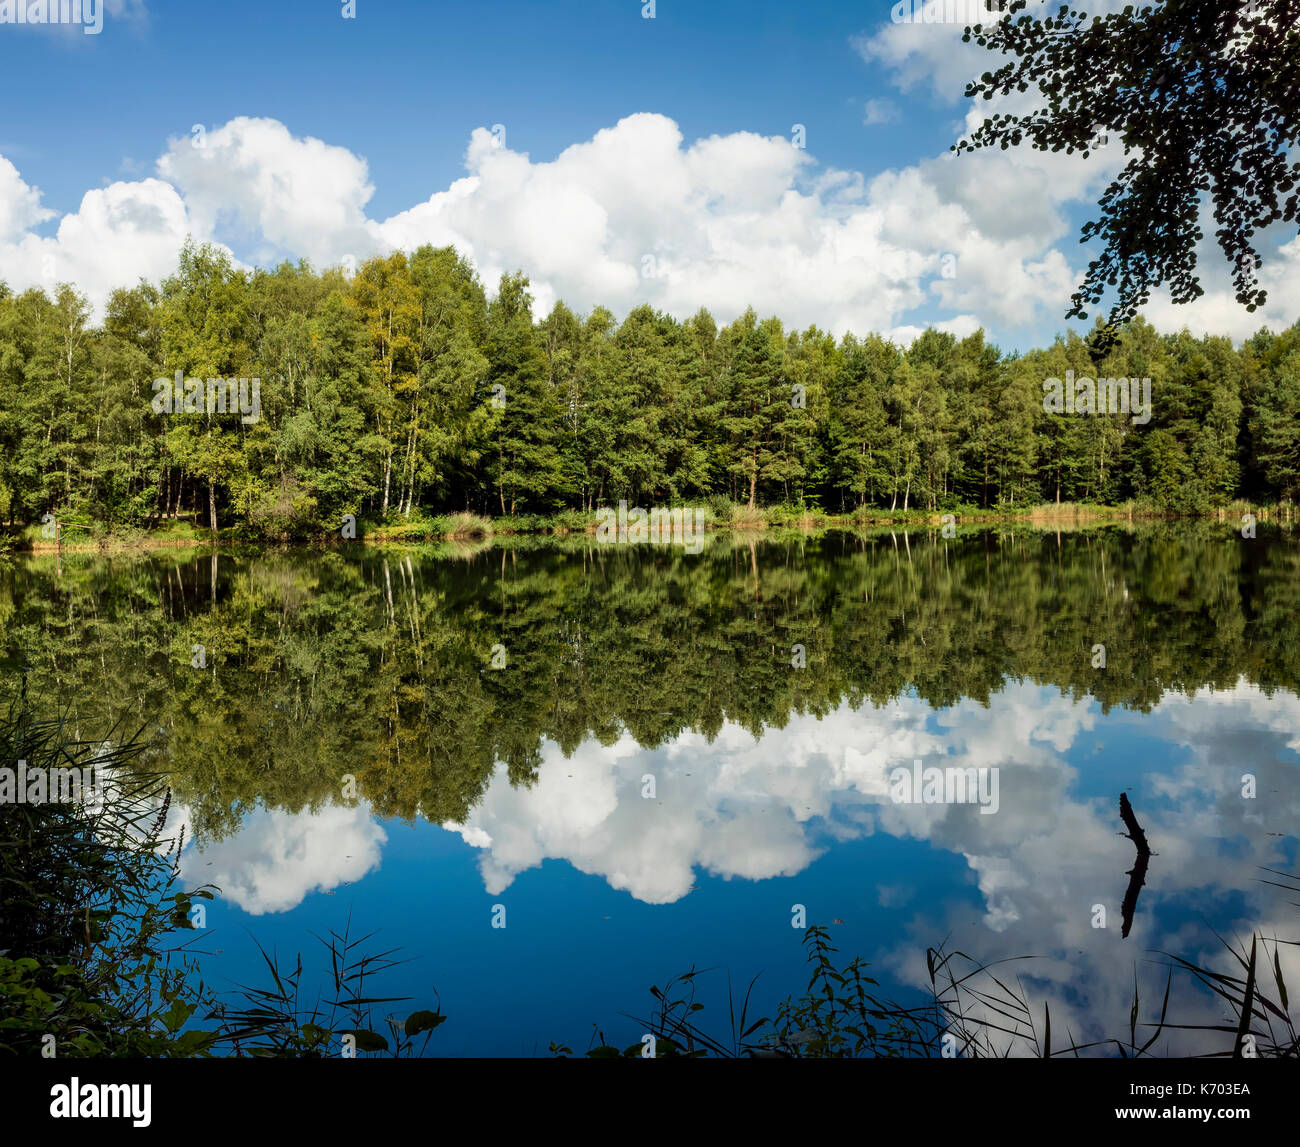 Haren, Emsland, Lower Saxony.  Deutschland.  Germany.  A scenic view of reflections on the far bank of a lake in the suburbs of Harren.  Photographed on a bright sunny morning, which created the stark reflections on the water. Stock Photo